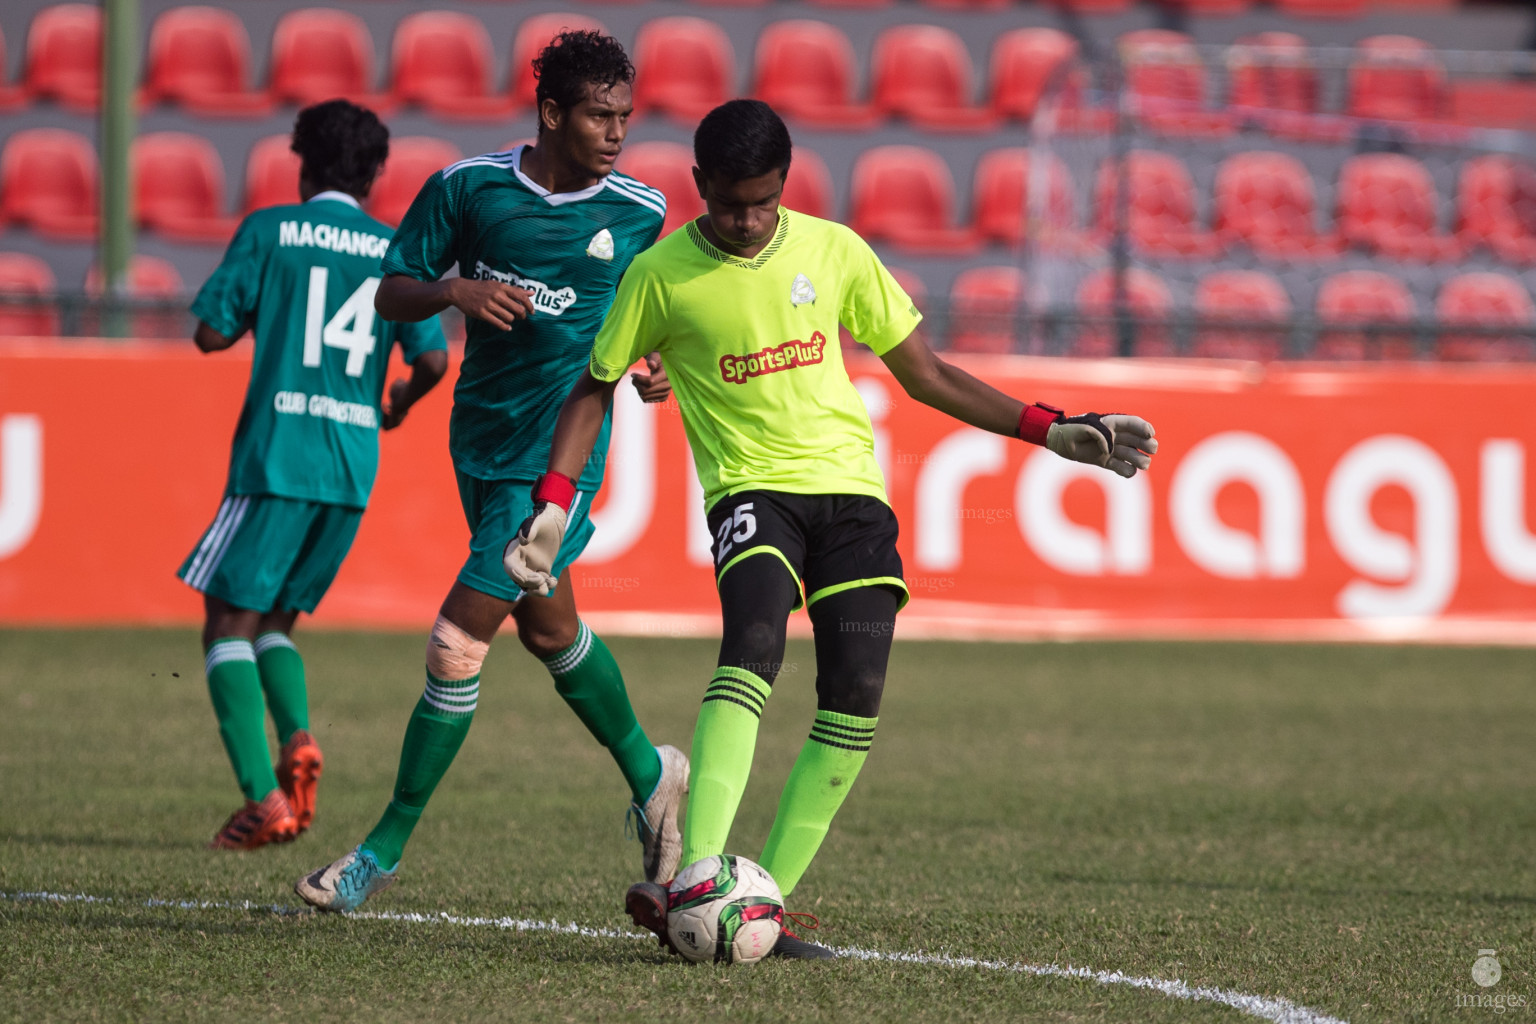 FAM Youth Championship 2019 - Club Eagles vs Club Green Streets in Male, Maldives, Wednesday February 13th, 2019. (Images.mv Photo/Suadh Abdul Sattar)